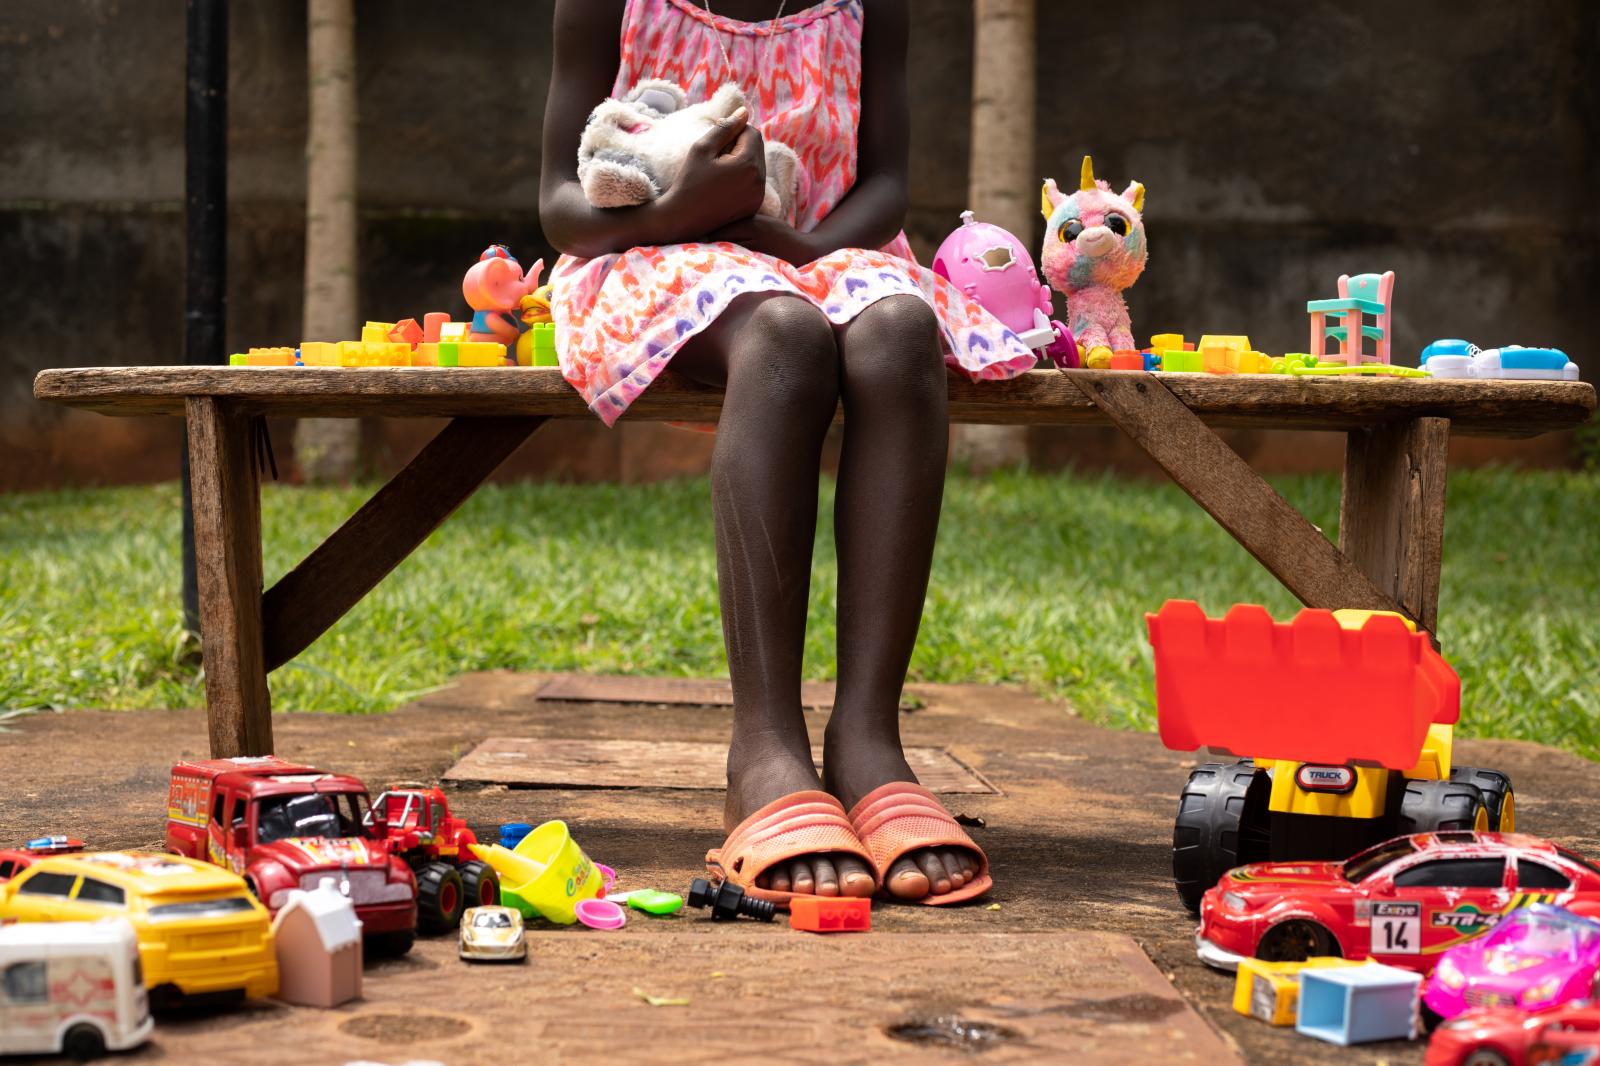 Image from Surviving Bery: A Girlhood Trauma | DeLovie Kwagala  - “I have a lot of sisters! And toys!”   Immy*...